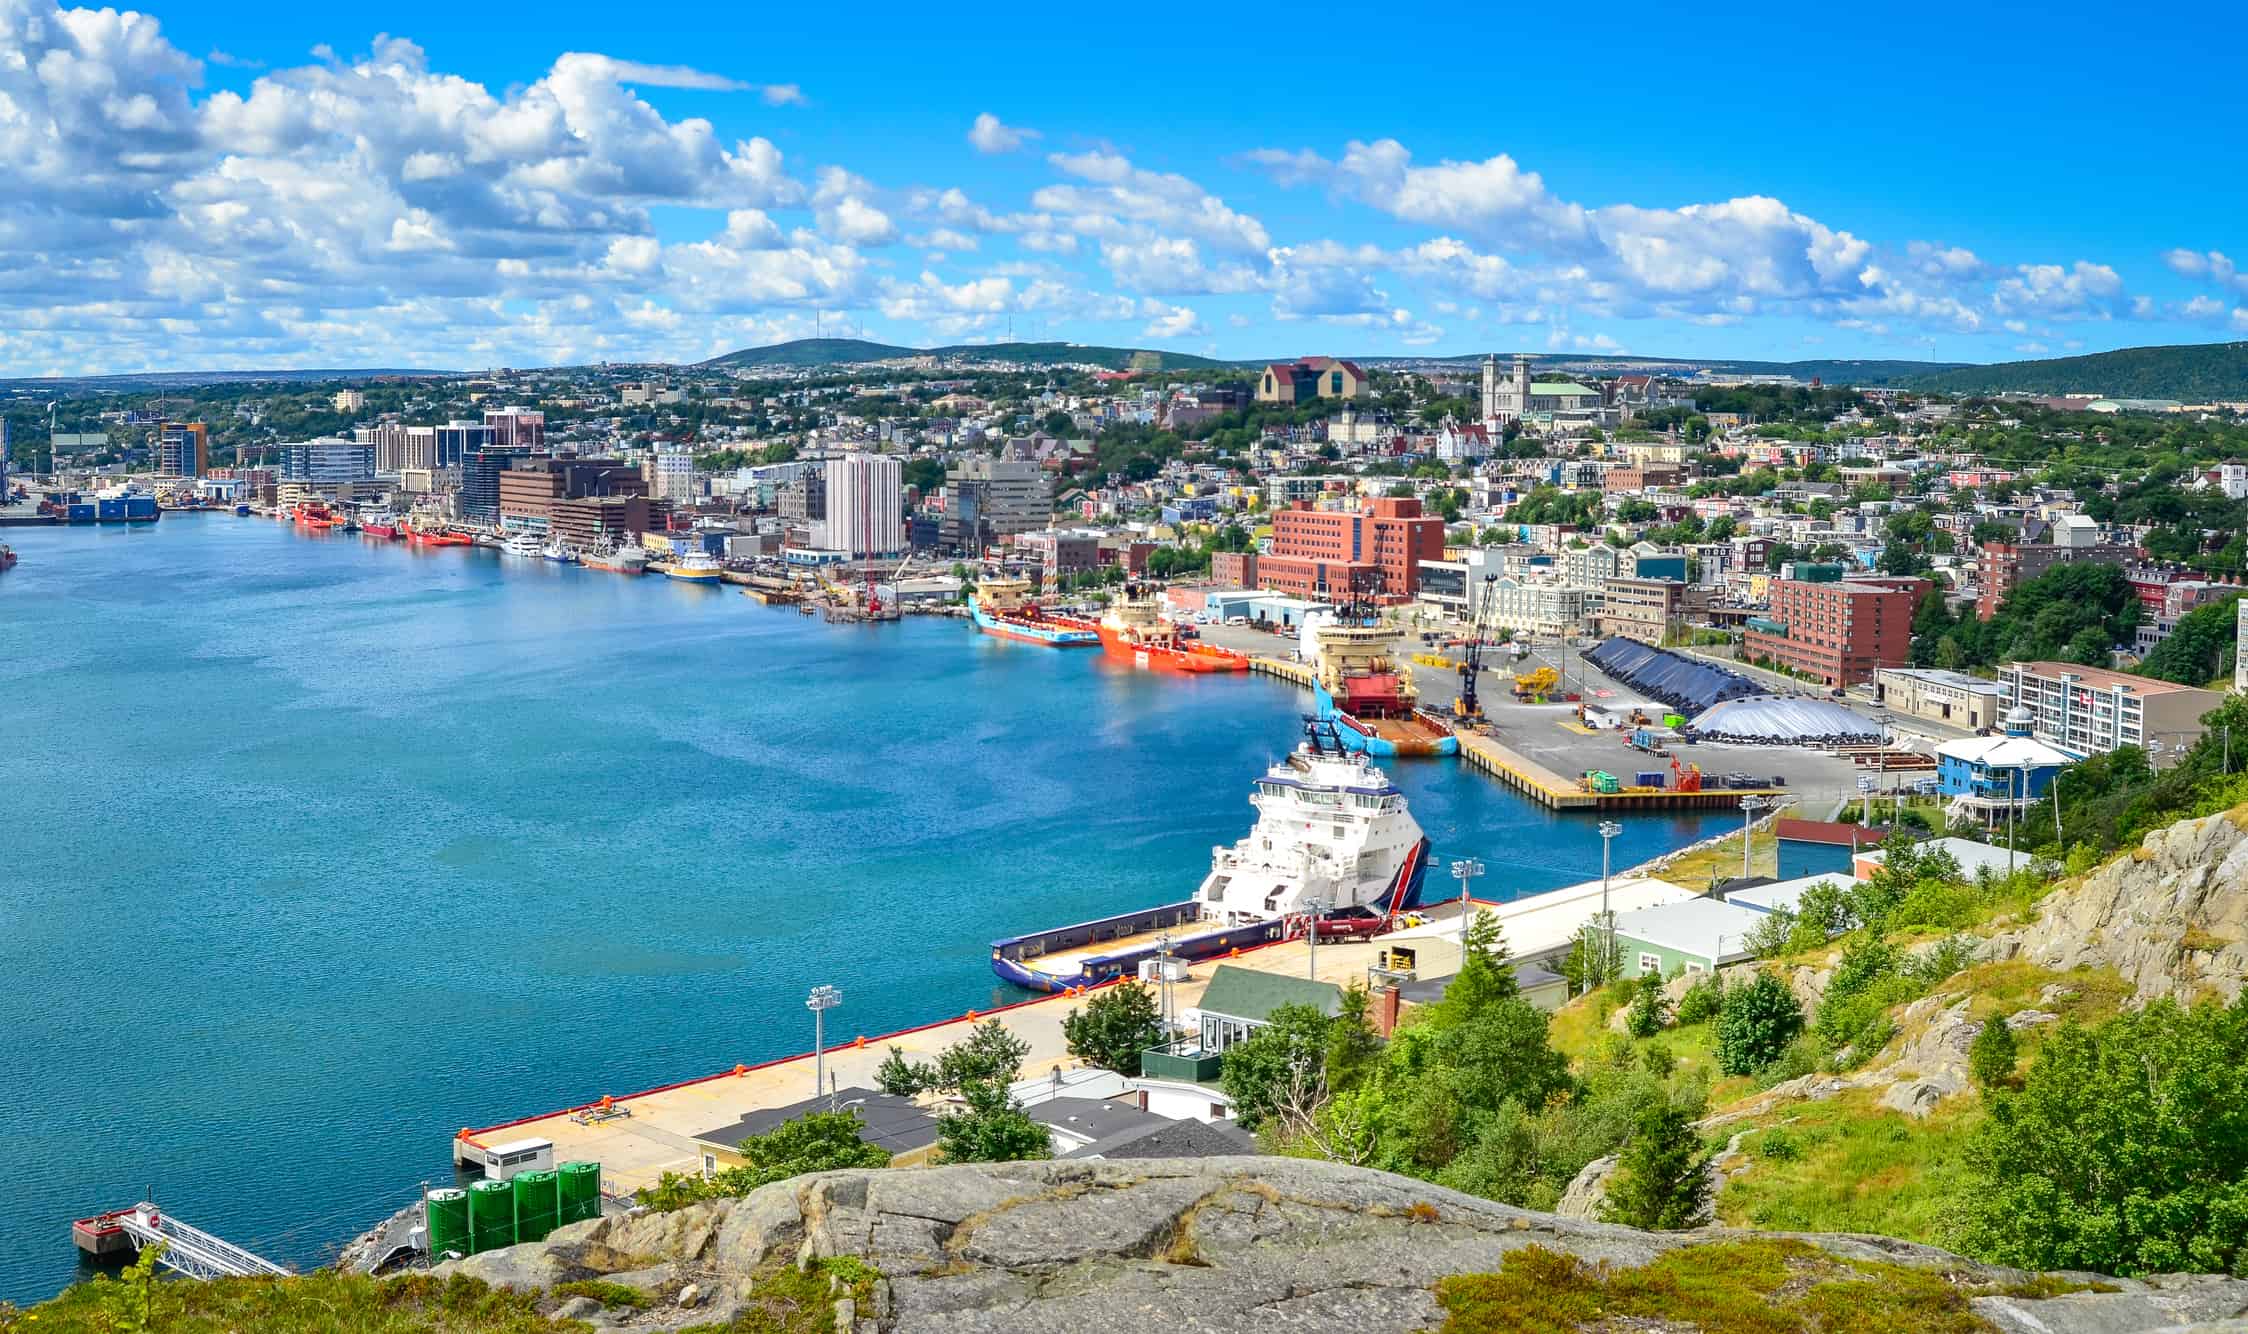 Panoramic view, St John's Harbour in Newfoundland Canada.